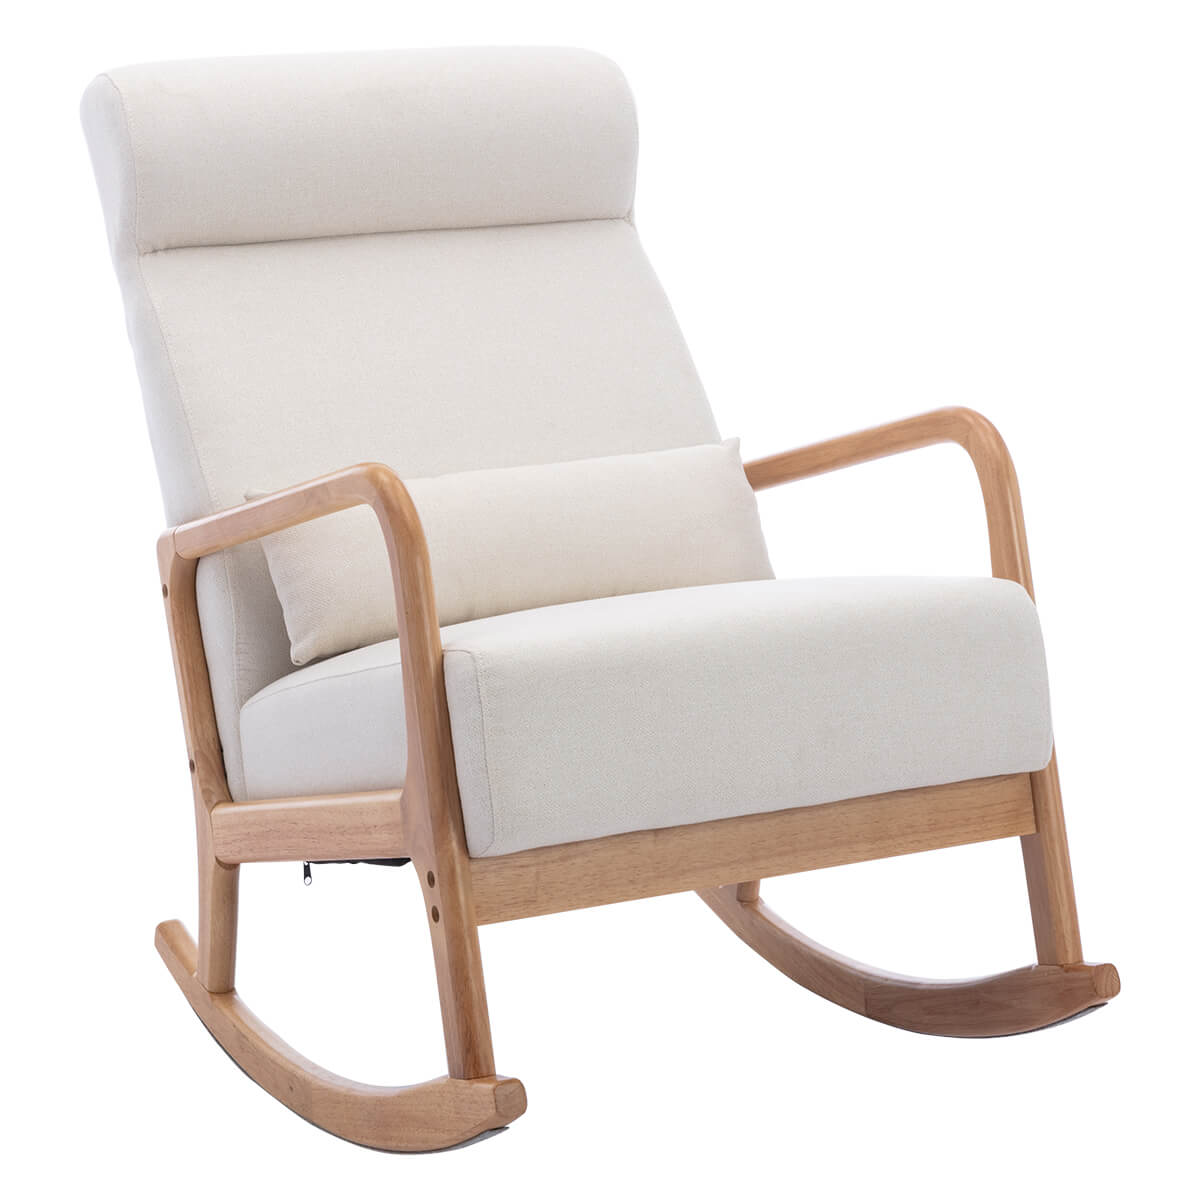 Mid-Century Upholstered Rocking Chair with Thick Padded Cushion &amp; Pillow, Glider Rocker Chair for Living Room